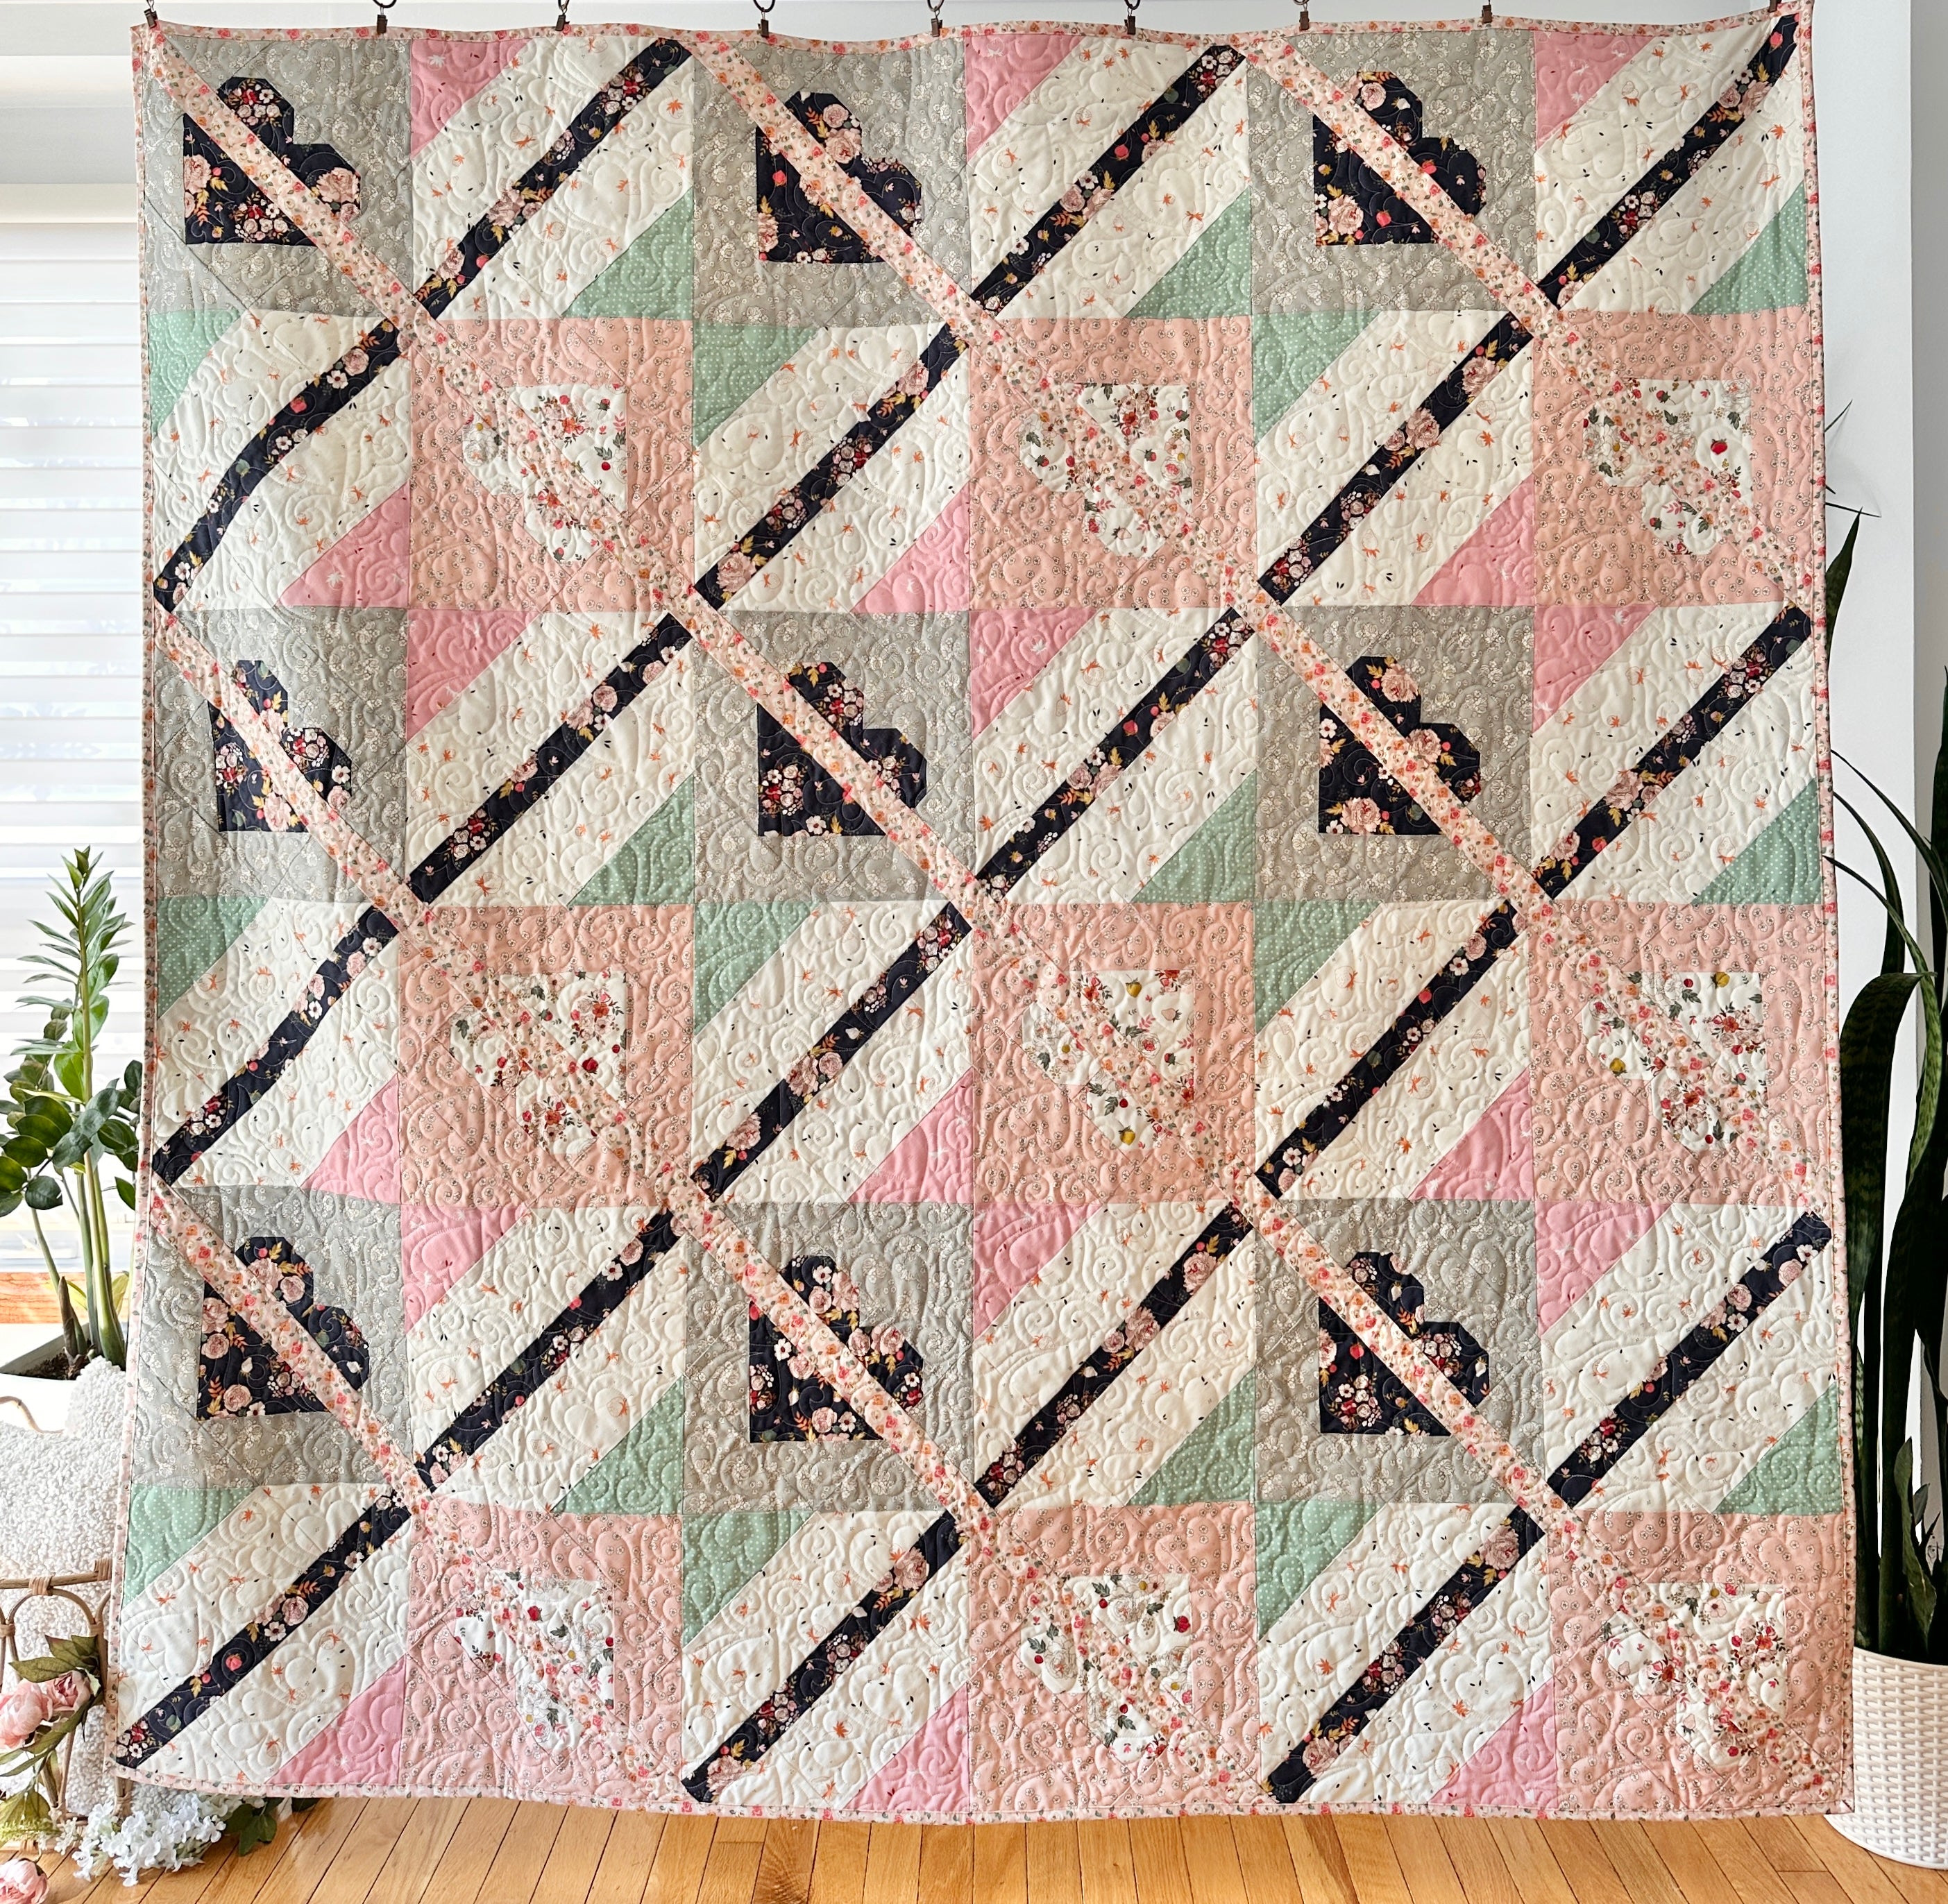 Sweetheart Plaid Quilt